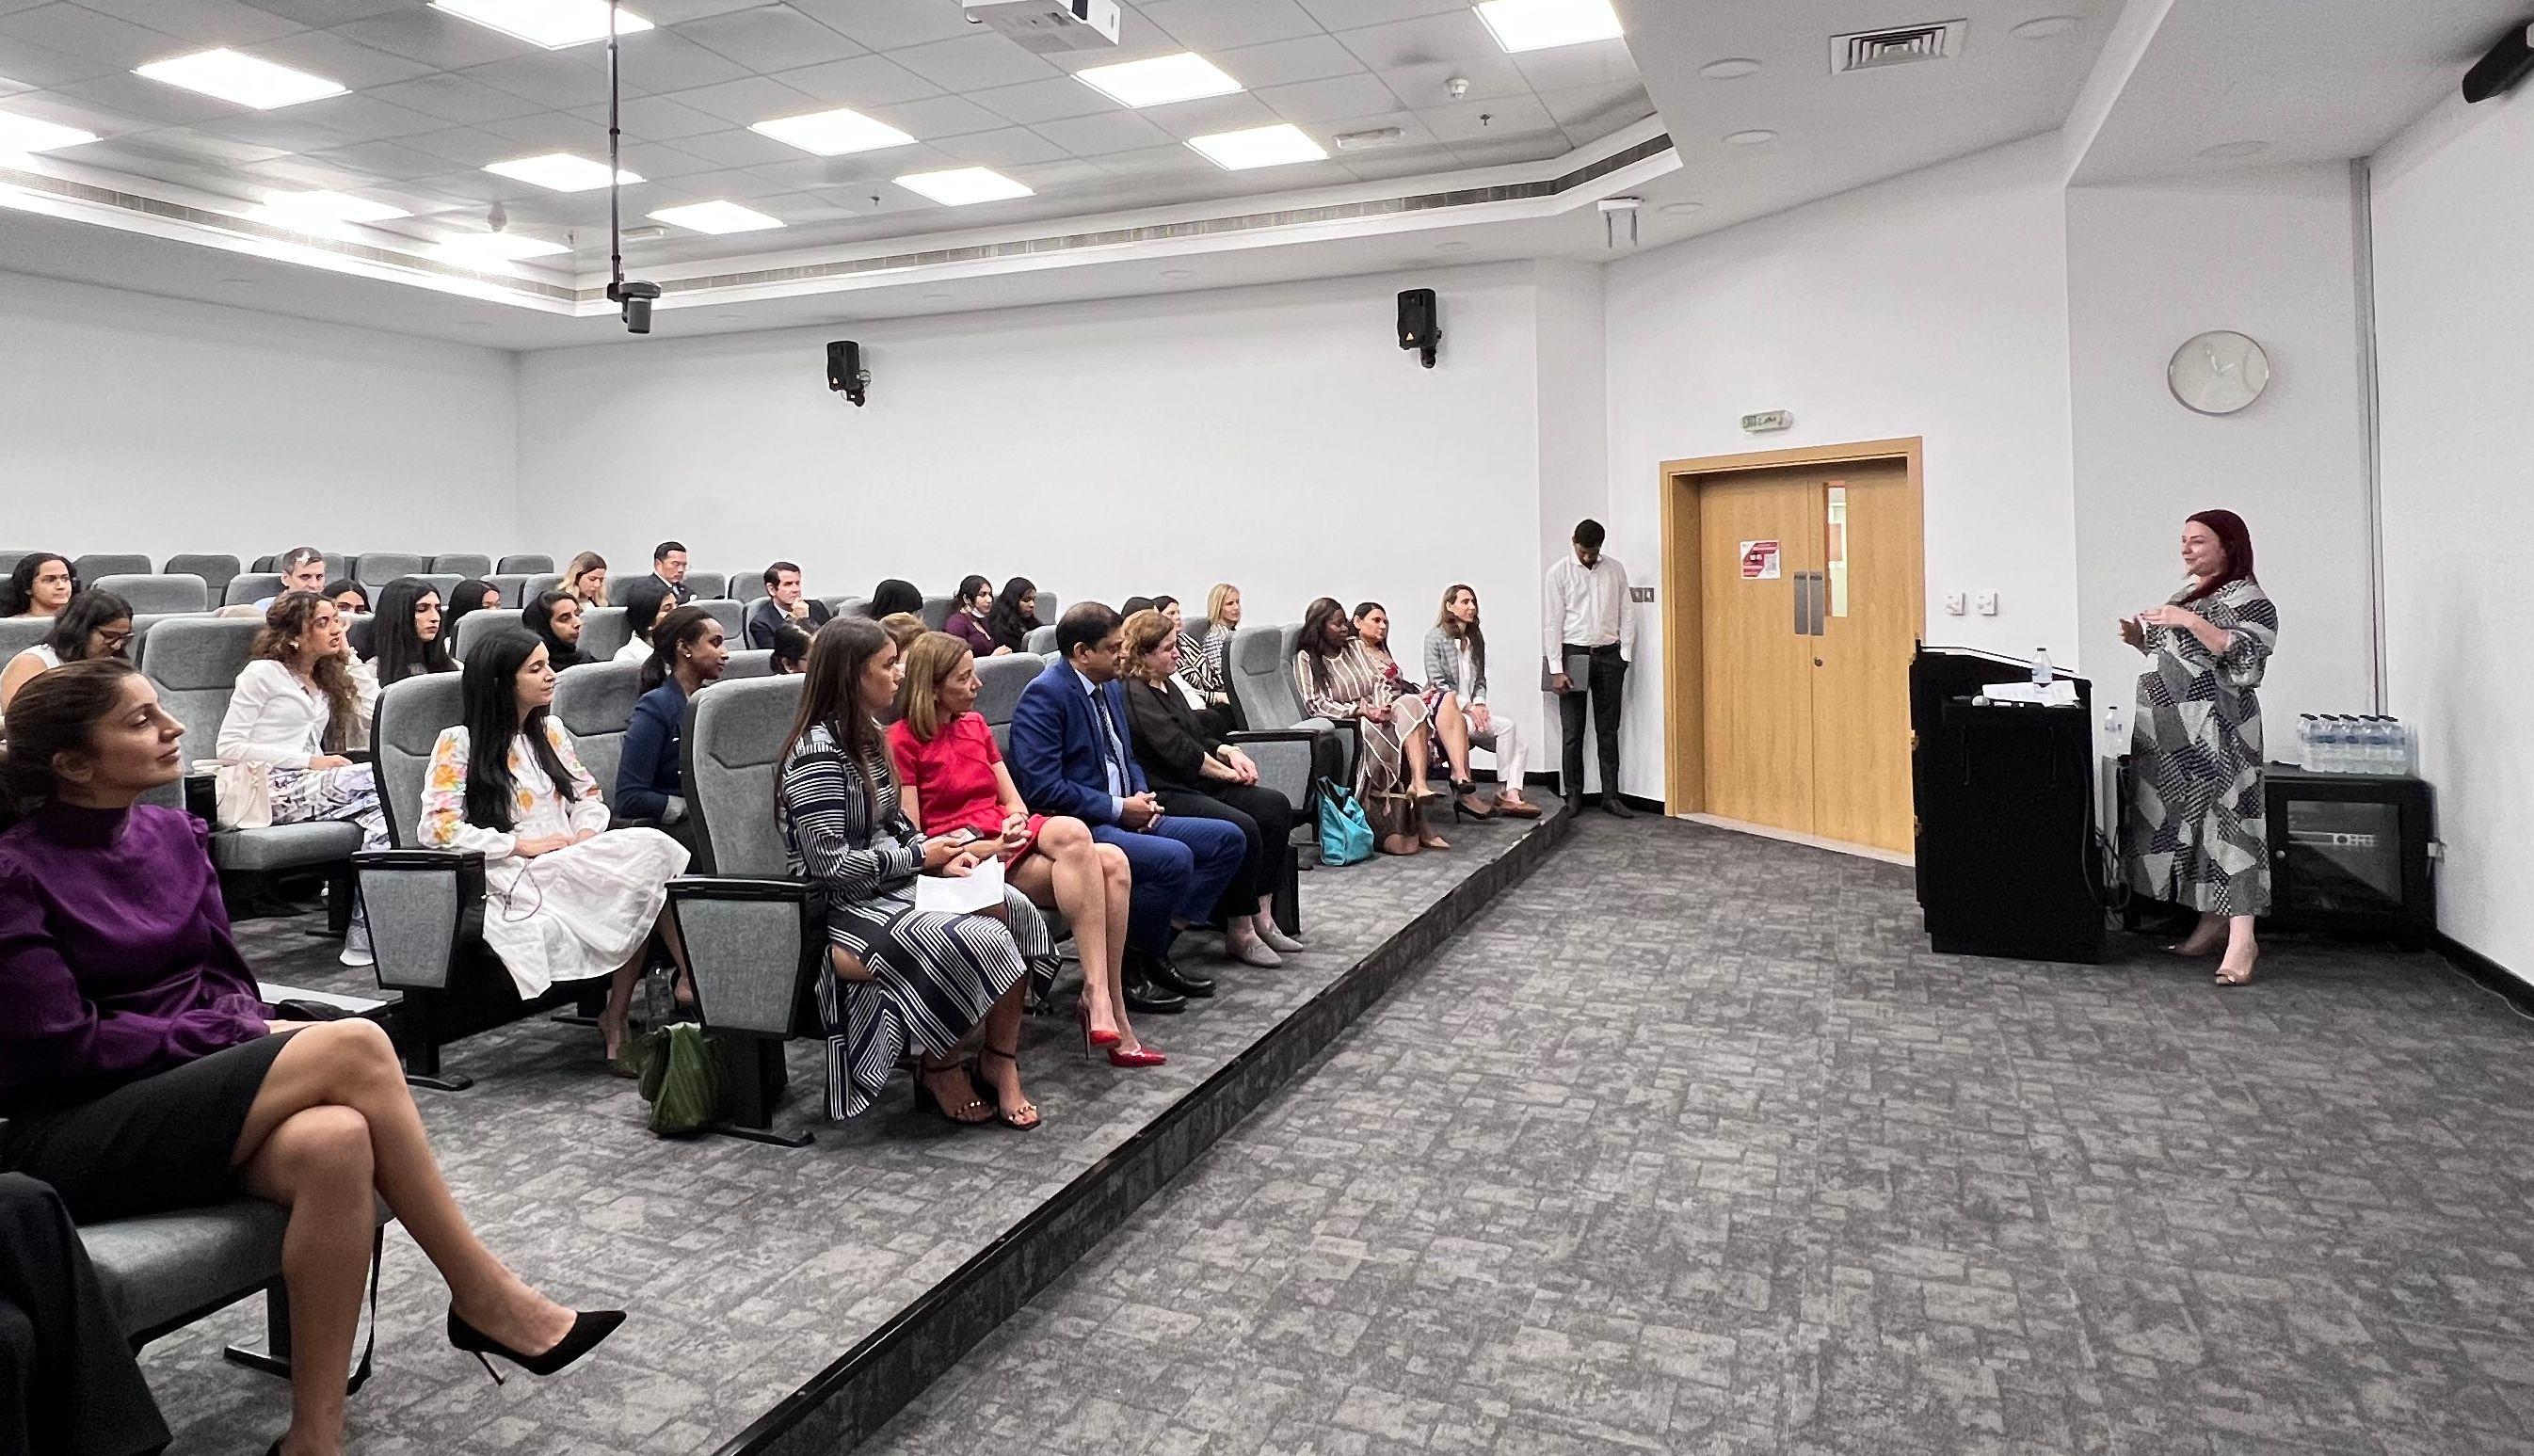 Middlesex University (MDX) Dubai celebrated the launch of JURIS Centre of Excellence for Legal Education and Training on 28th November in the presence of the Advisory Board, industry professionals, faculty and students. 